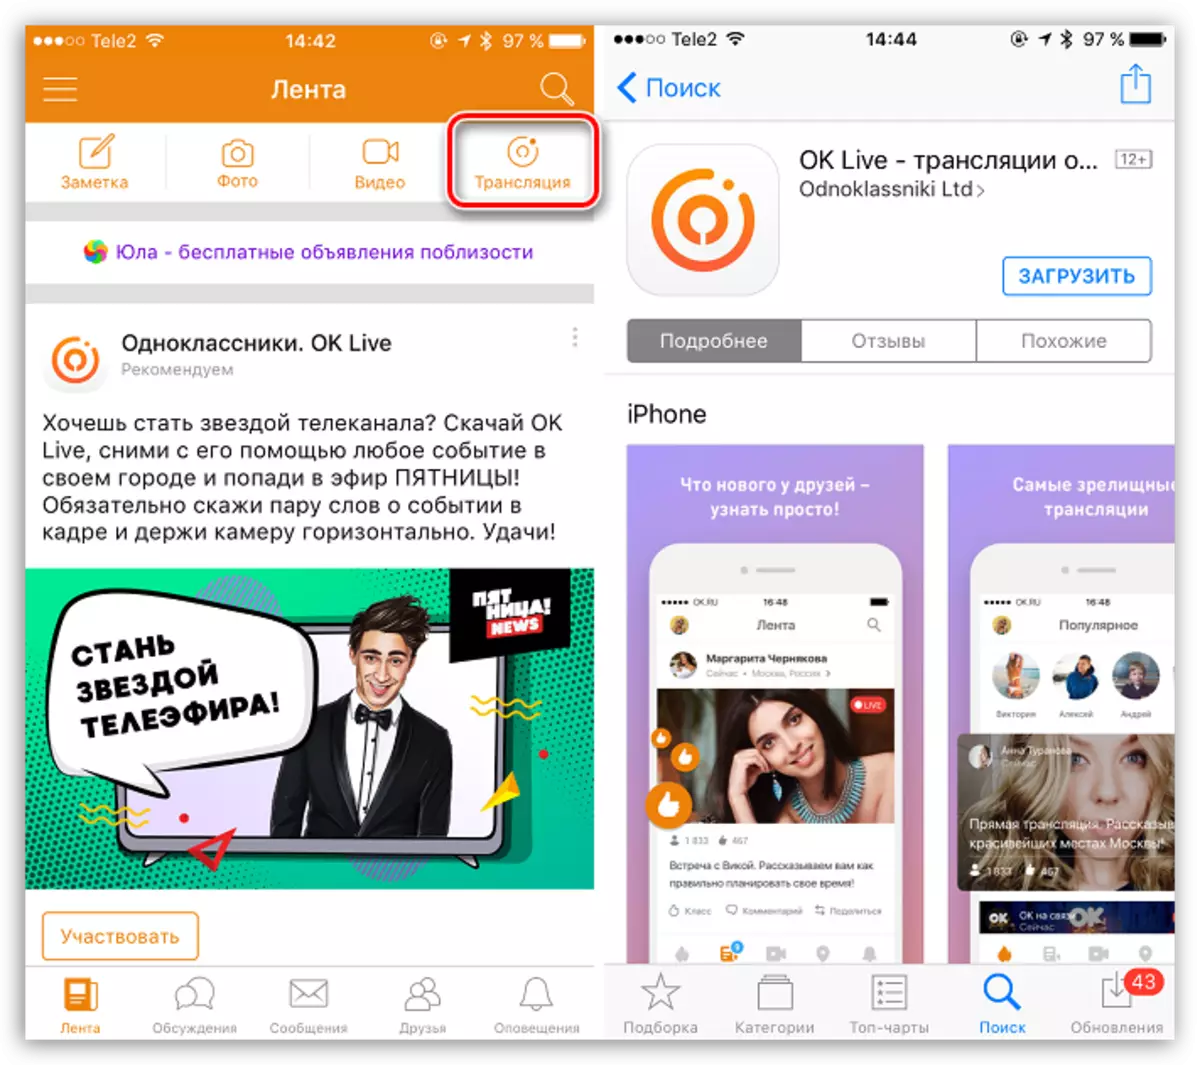 Live broadcasts in Application Classmates for iOS